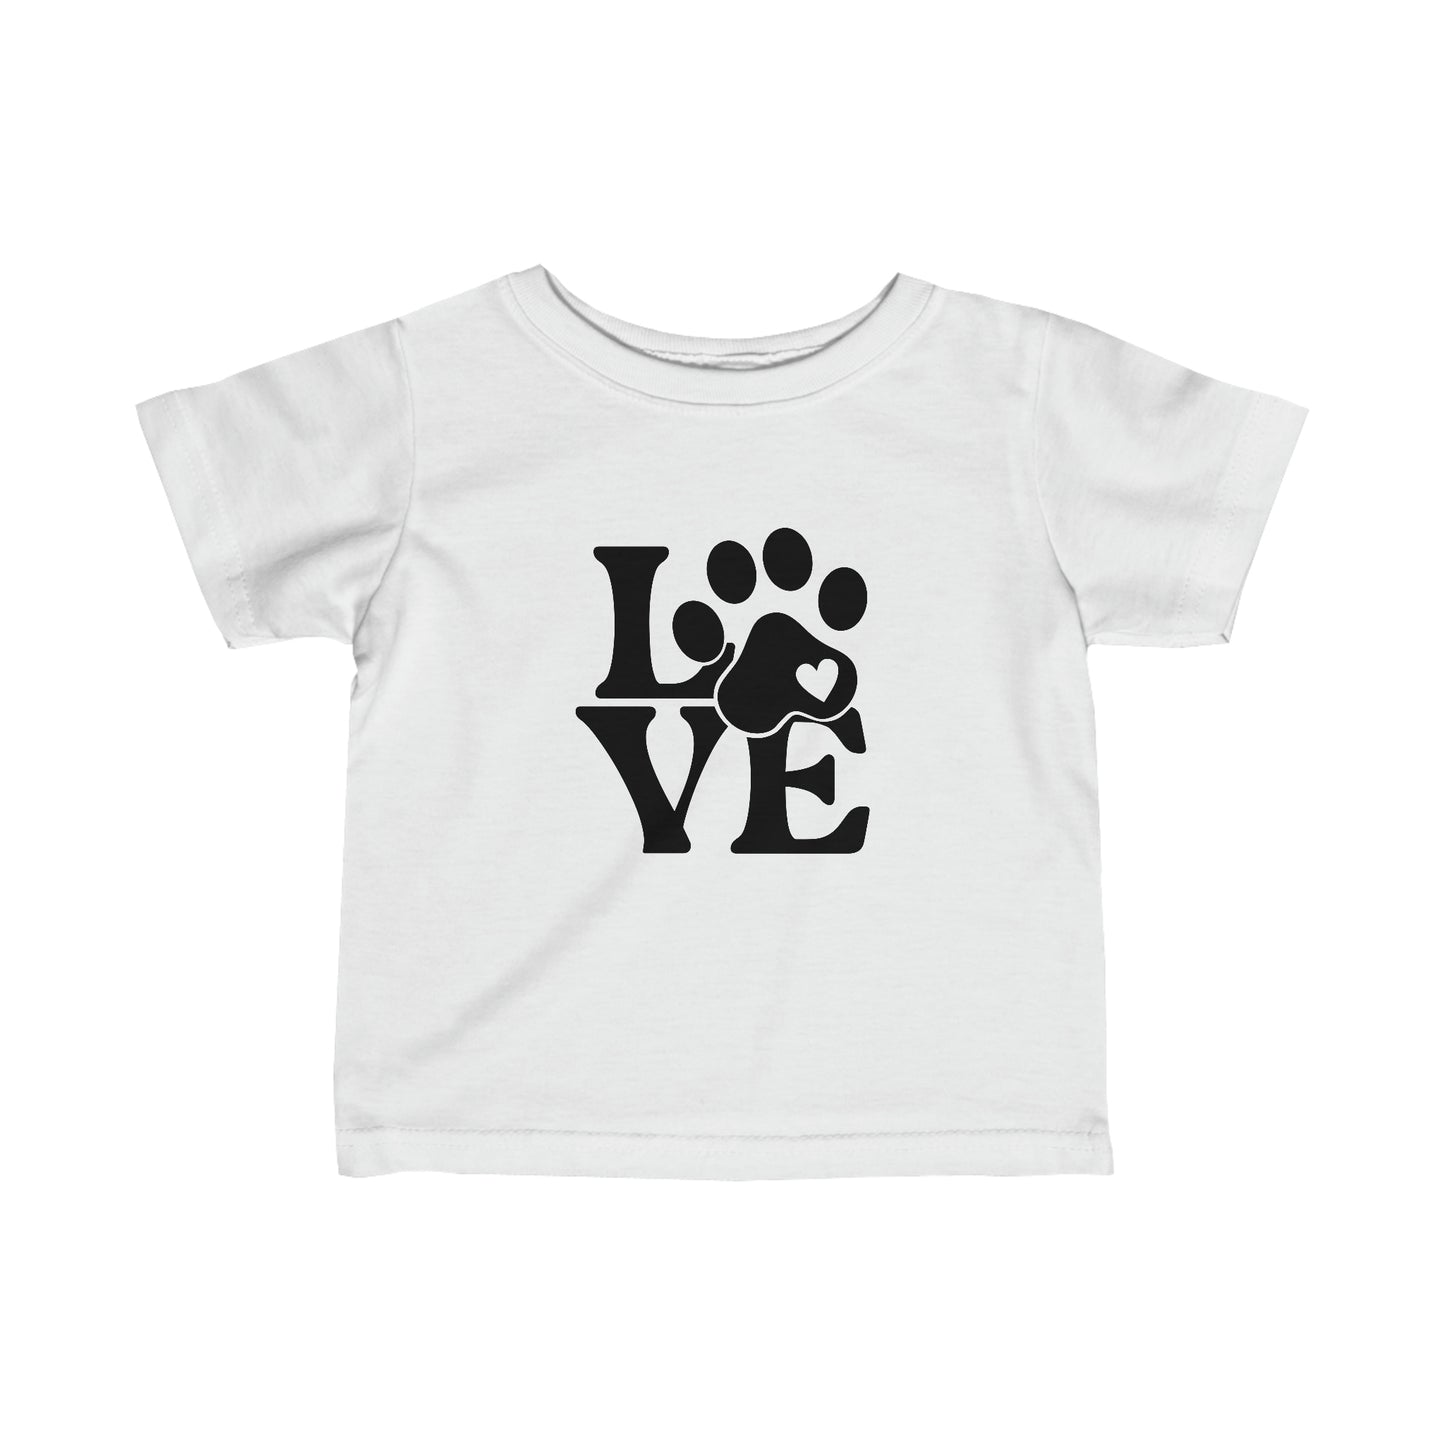 Dog, Animals, Love, Words- Baby, Infant, Toddler, T-shirt